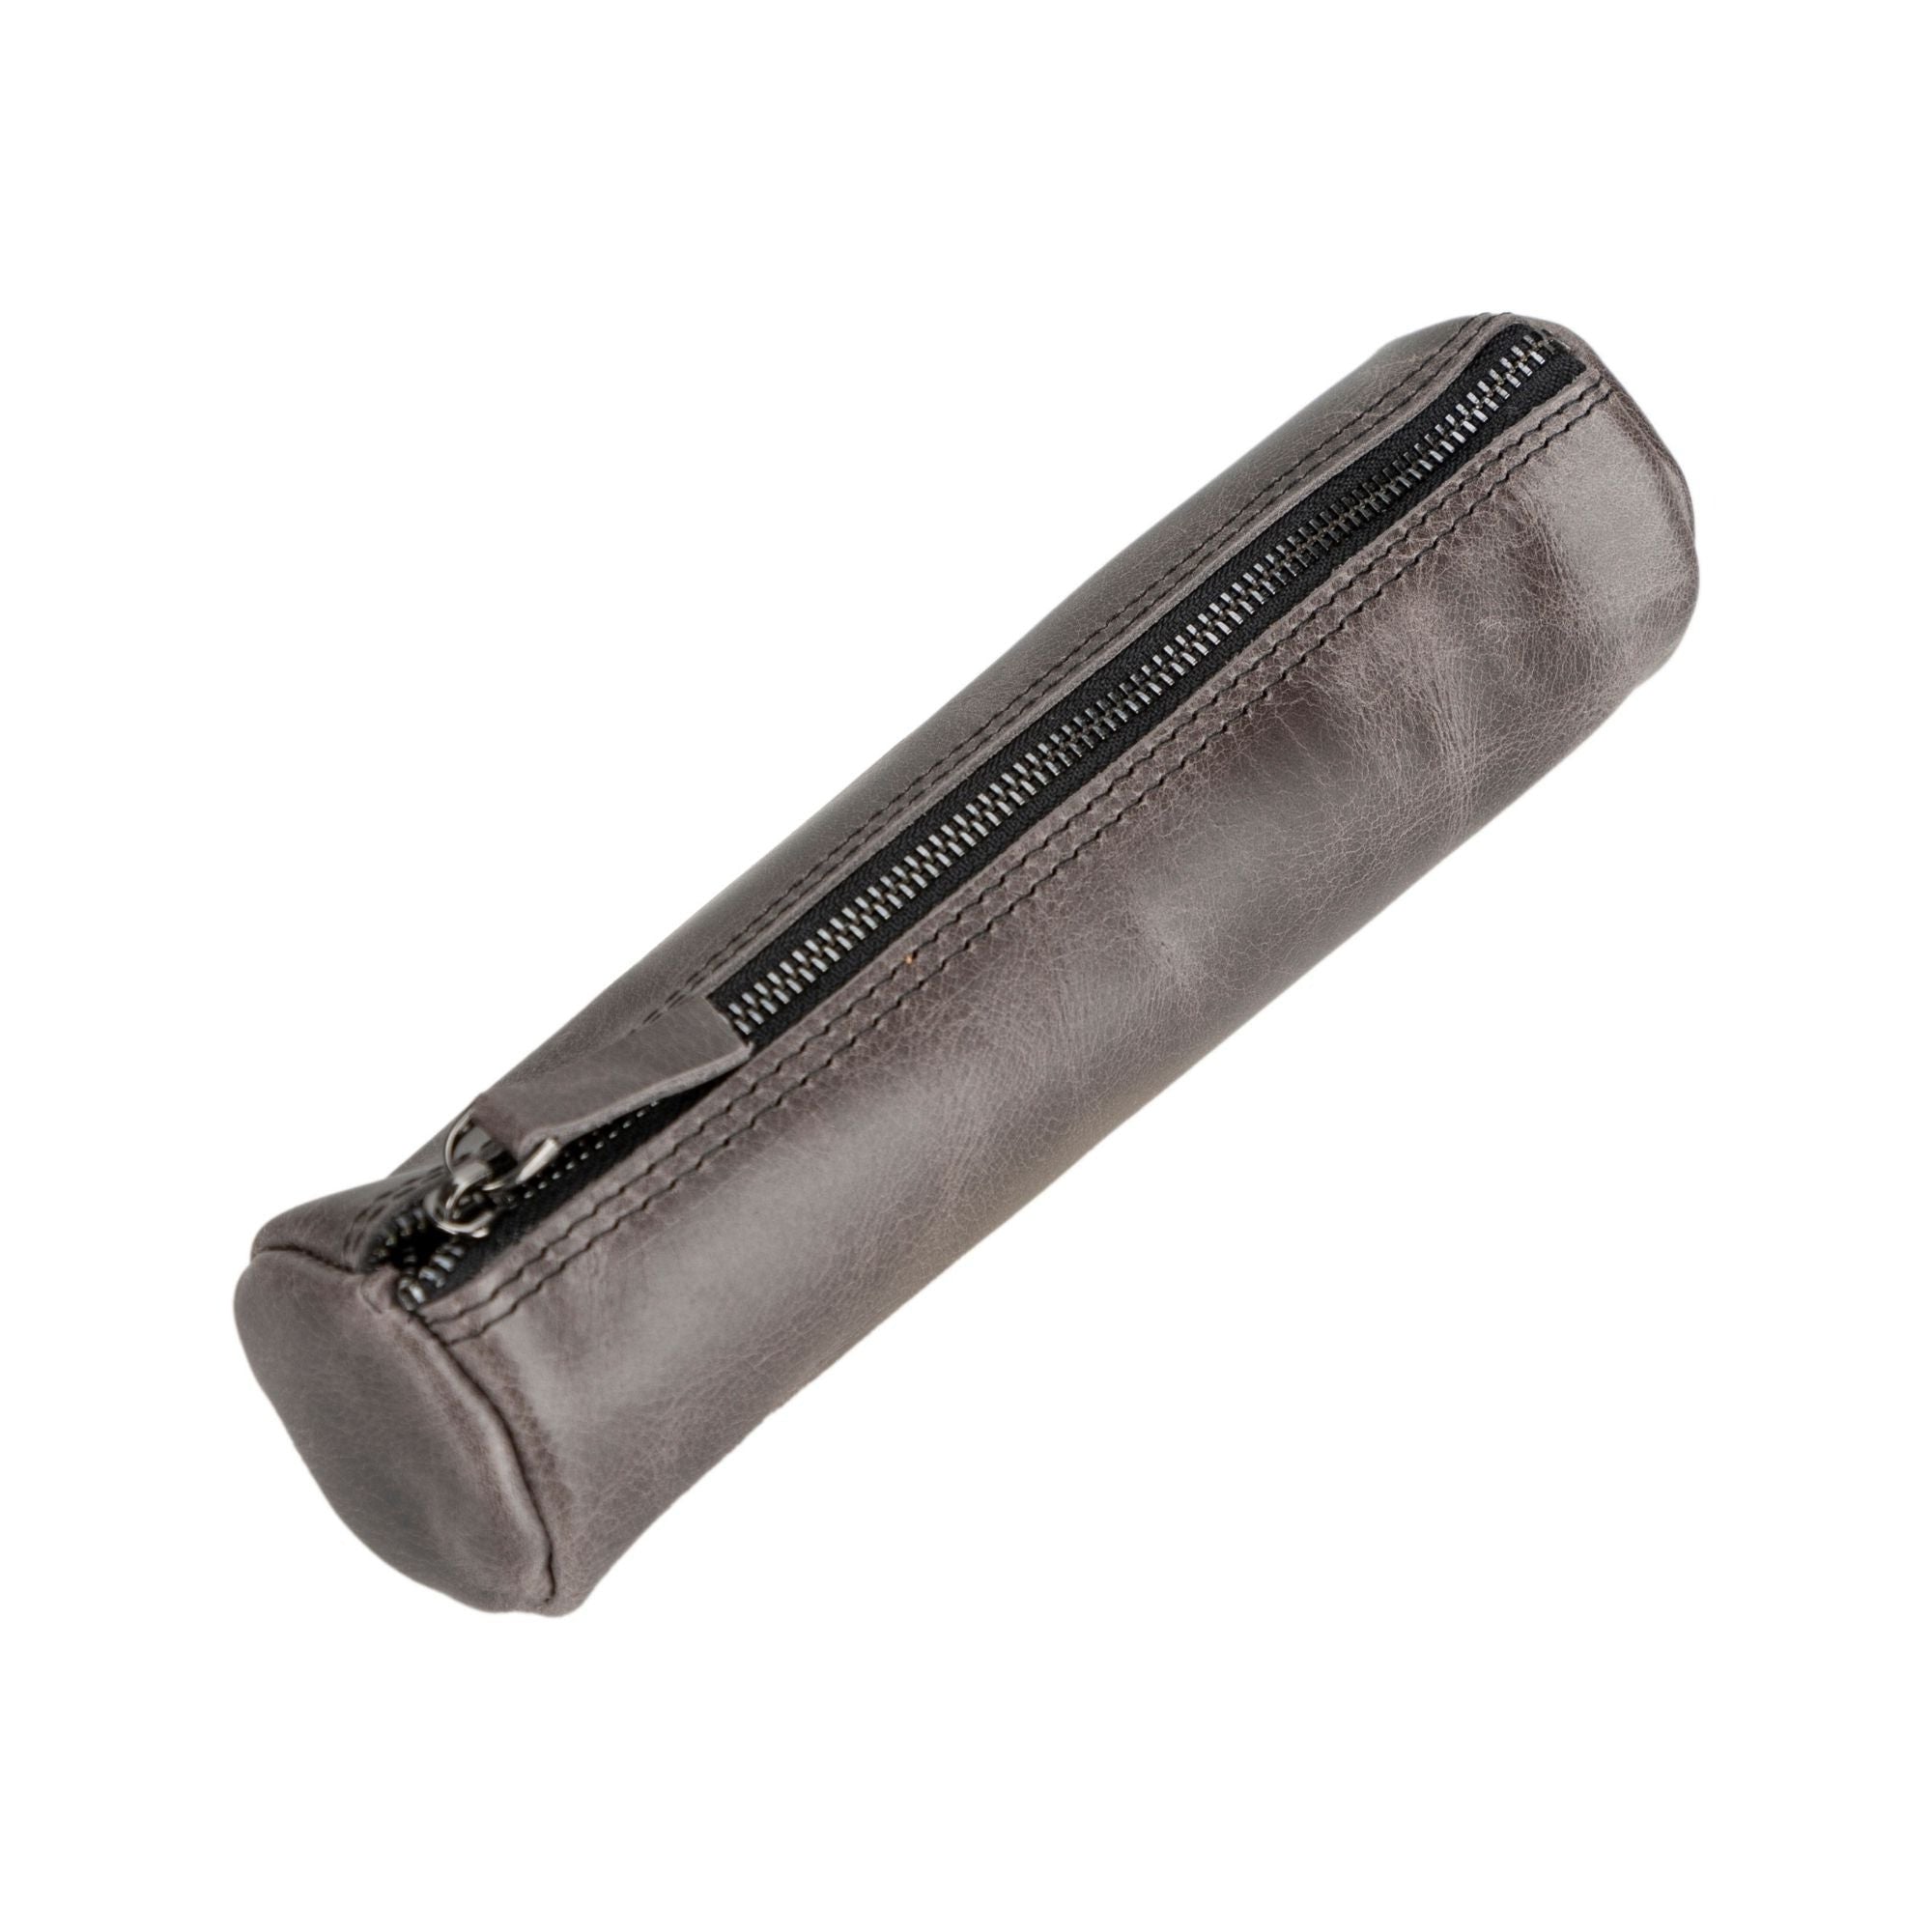 Leather Pencil Case - Handcrafted Premium Zippered Pen Pouch